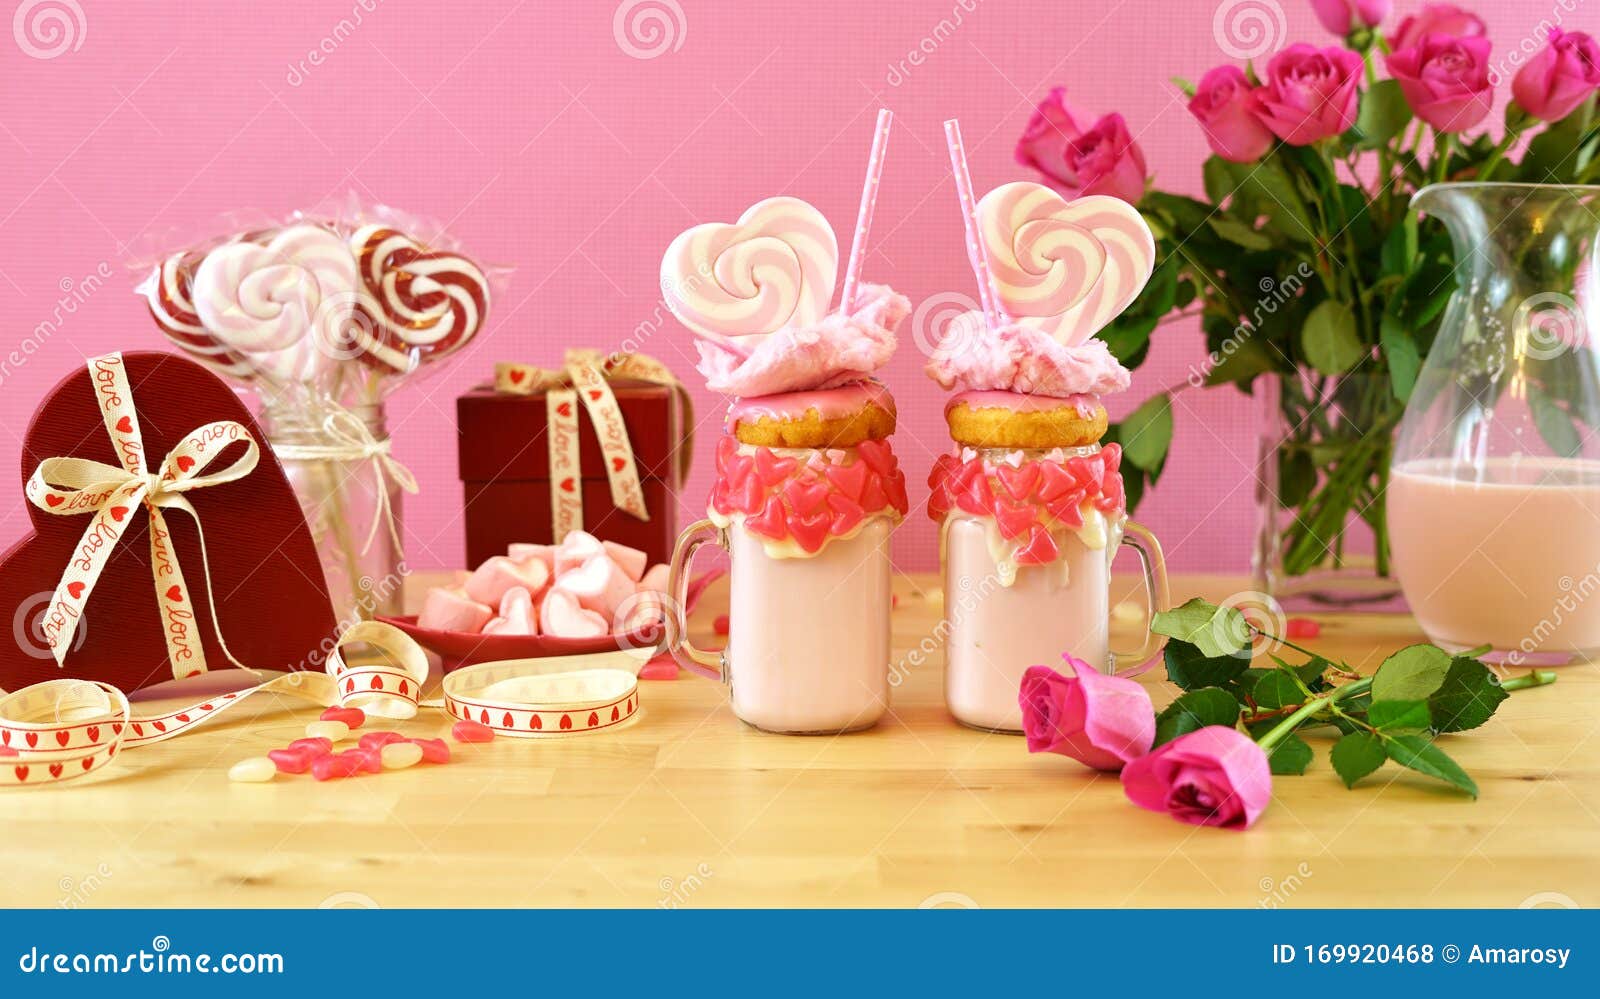 valentine`s day freak shakes with heart d lollipops and donuts.